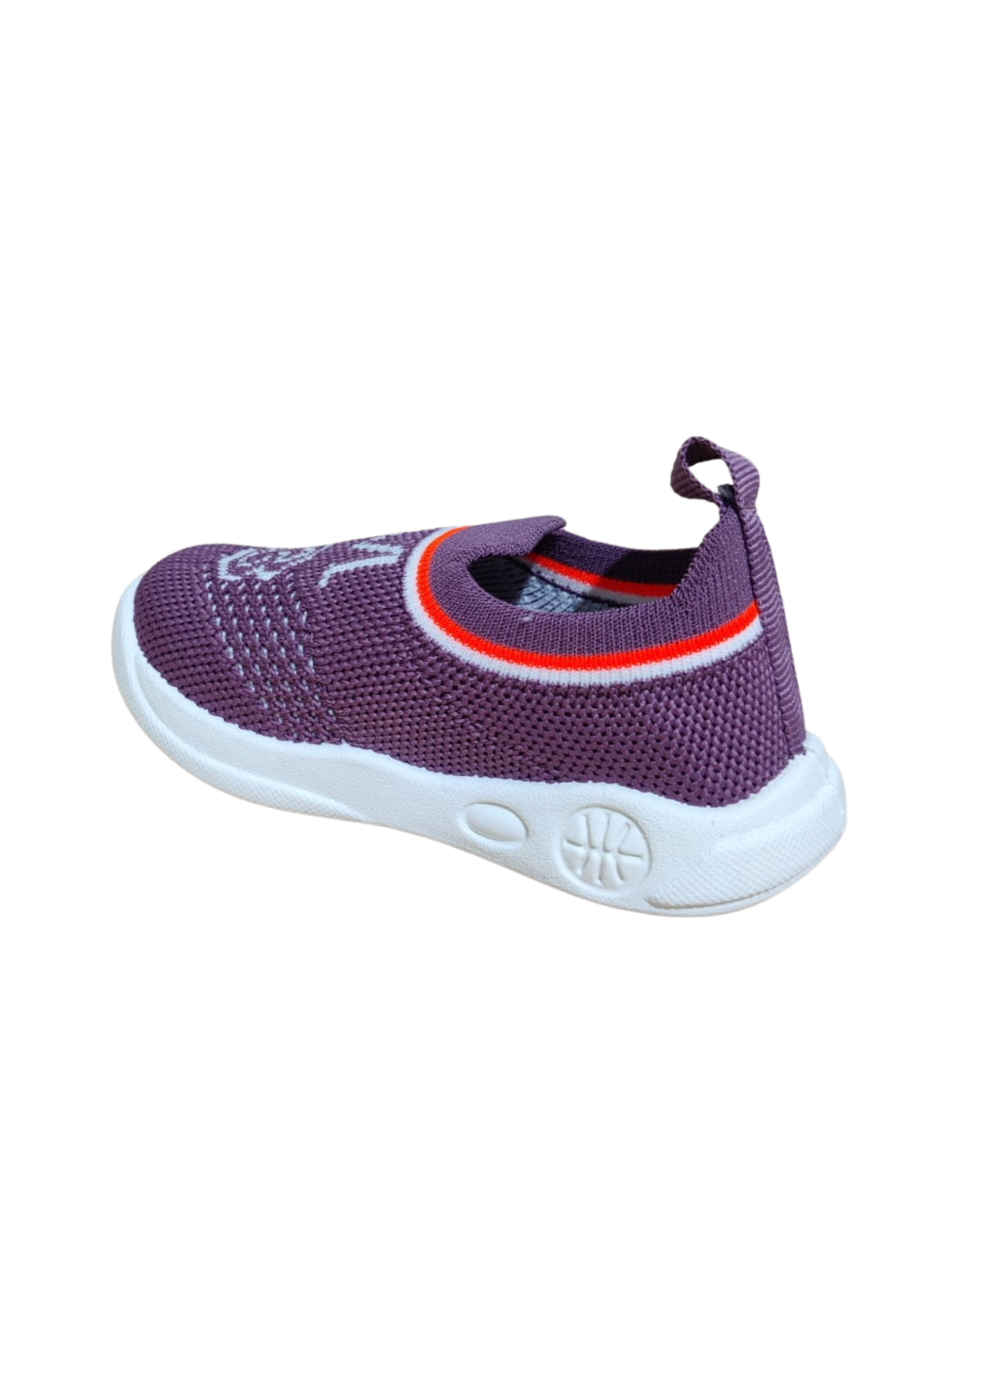 Onion Kids Sports Shoes Without laces